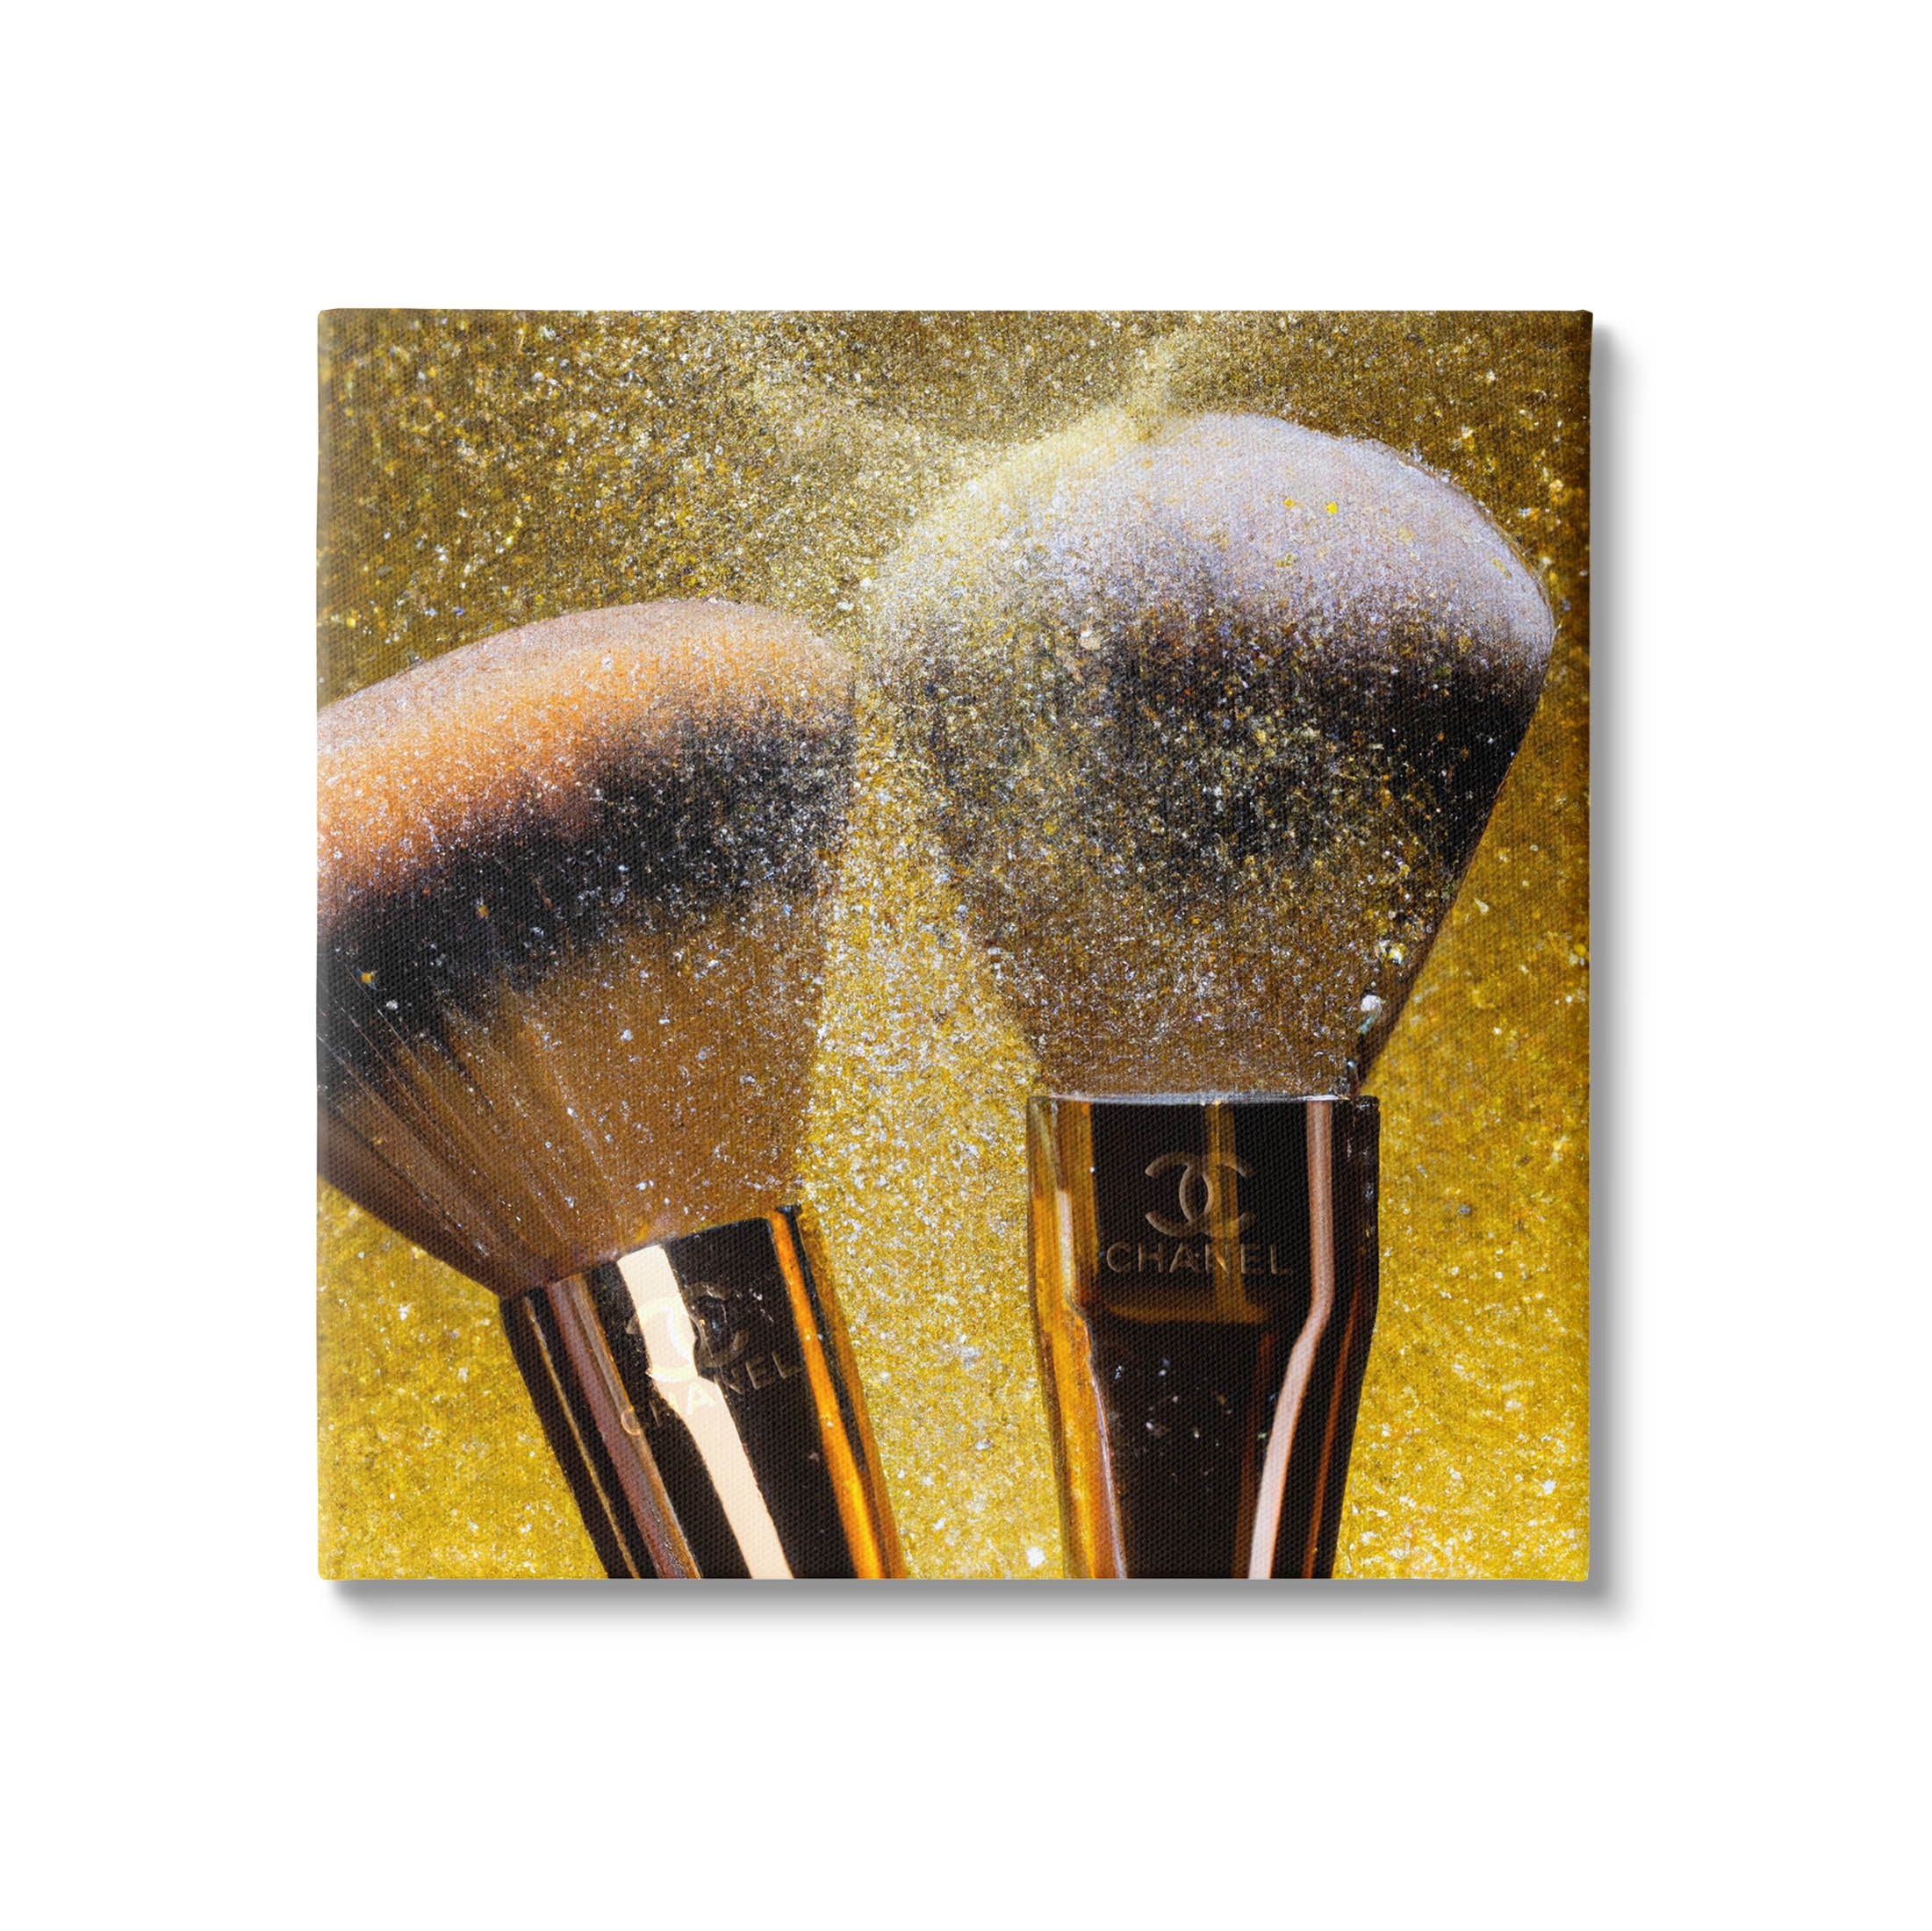 Chanel Gold Makeup Brushes